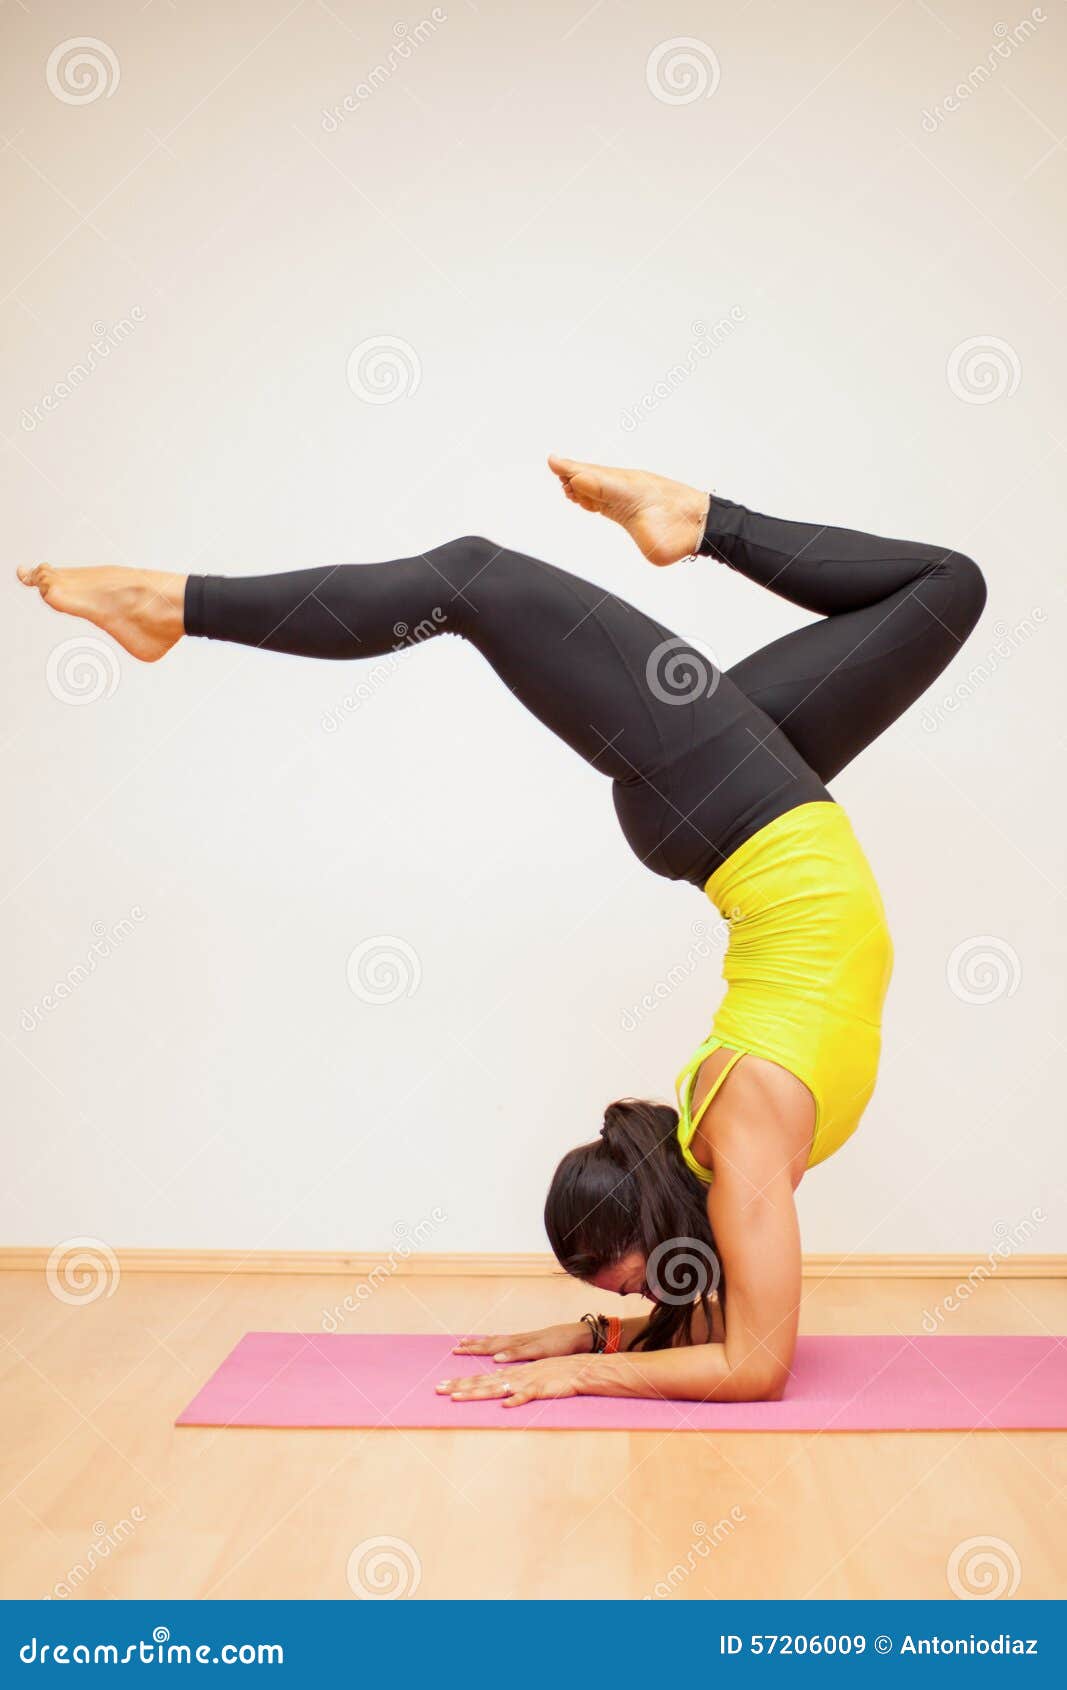 Practicing Some Yoga Poses In A Studio Stock Image - Image Of Background,  Pose: 57206009